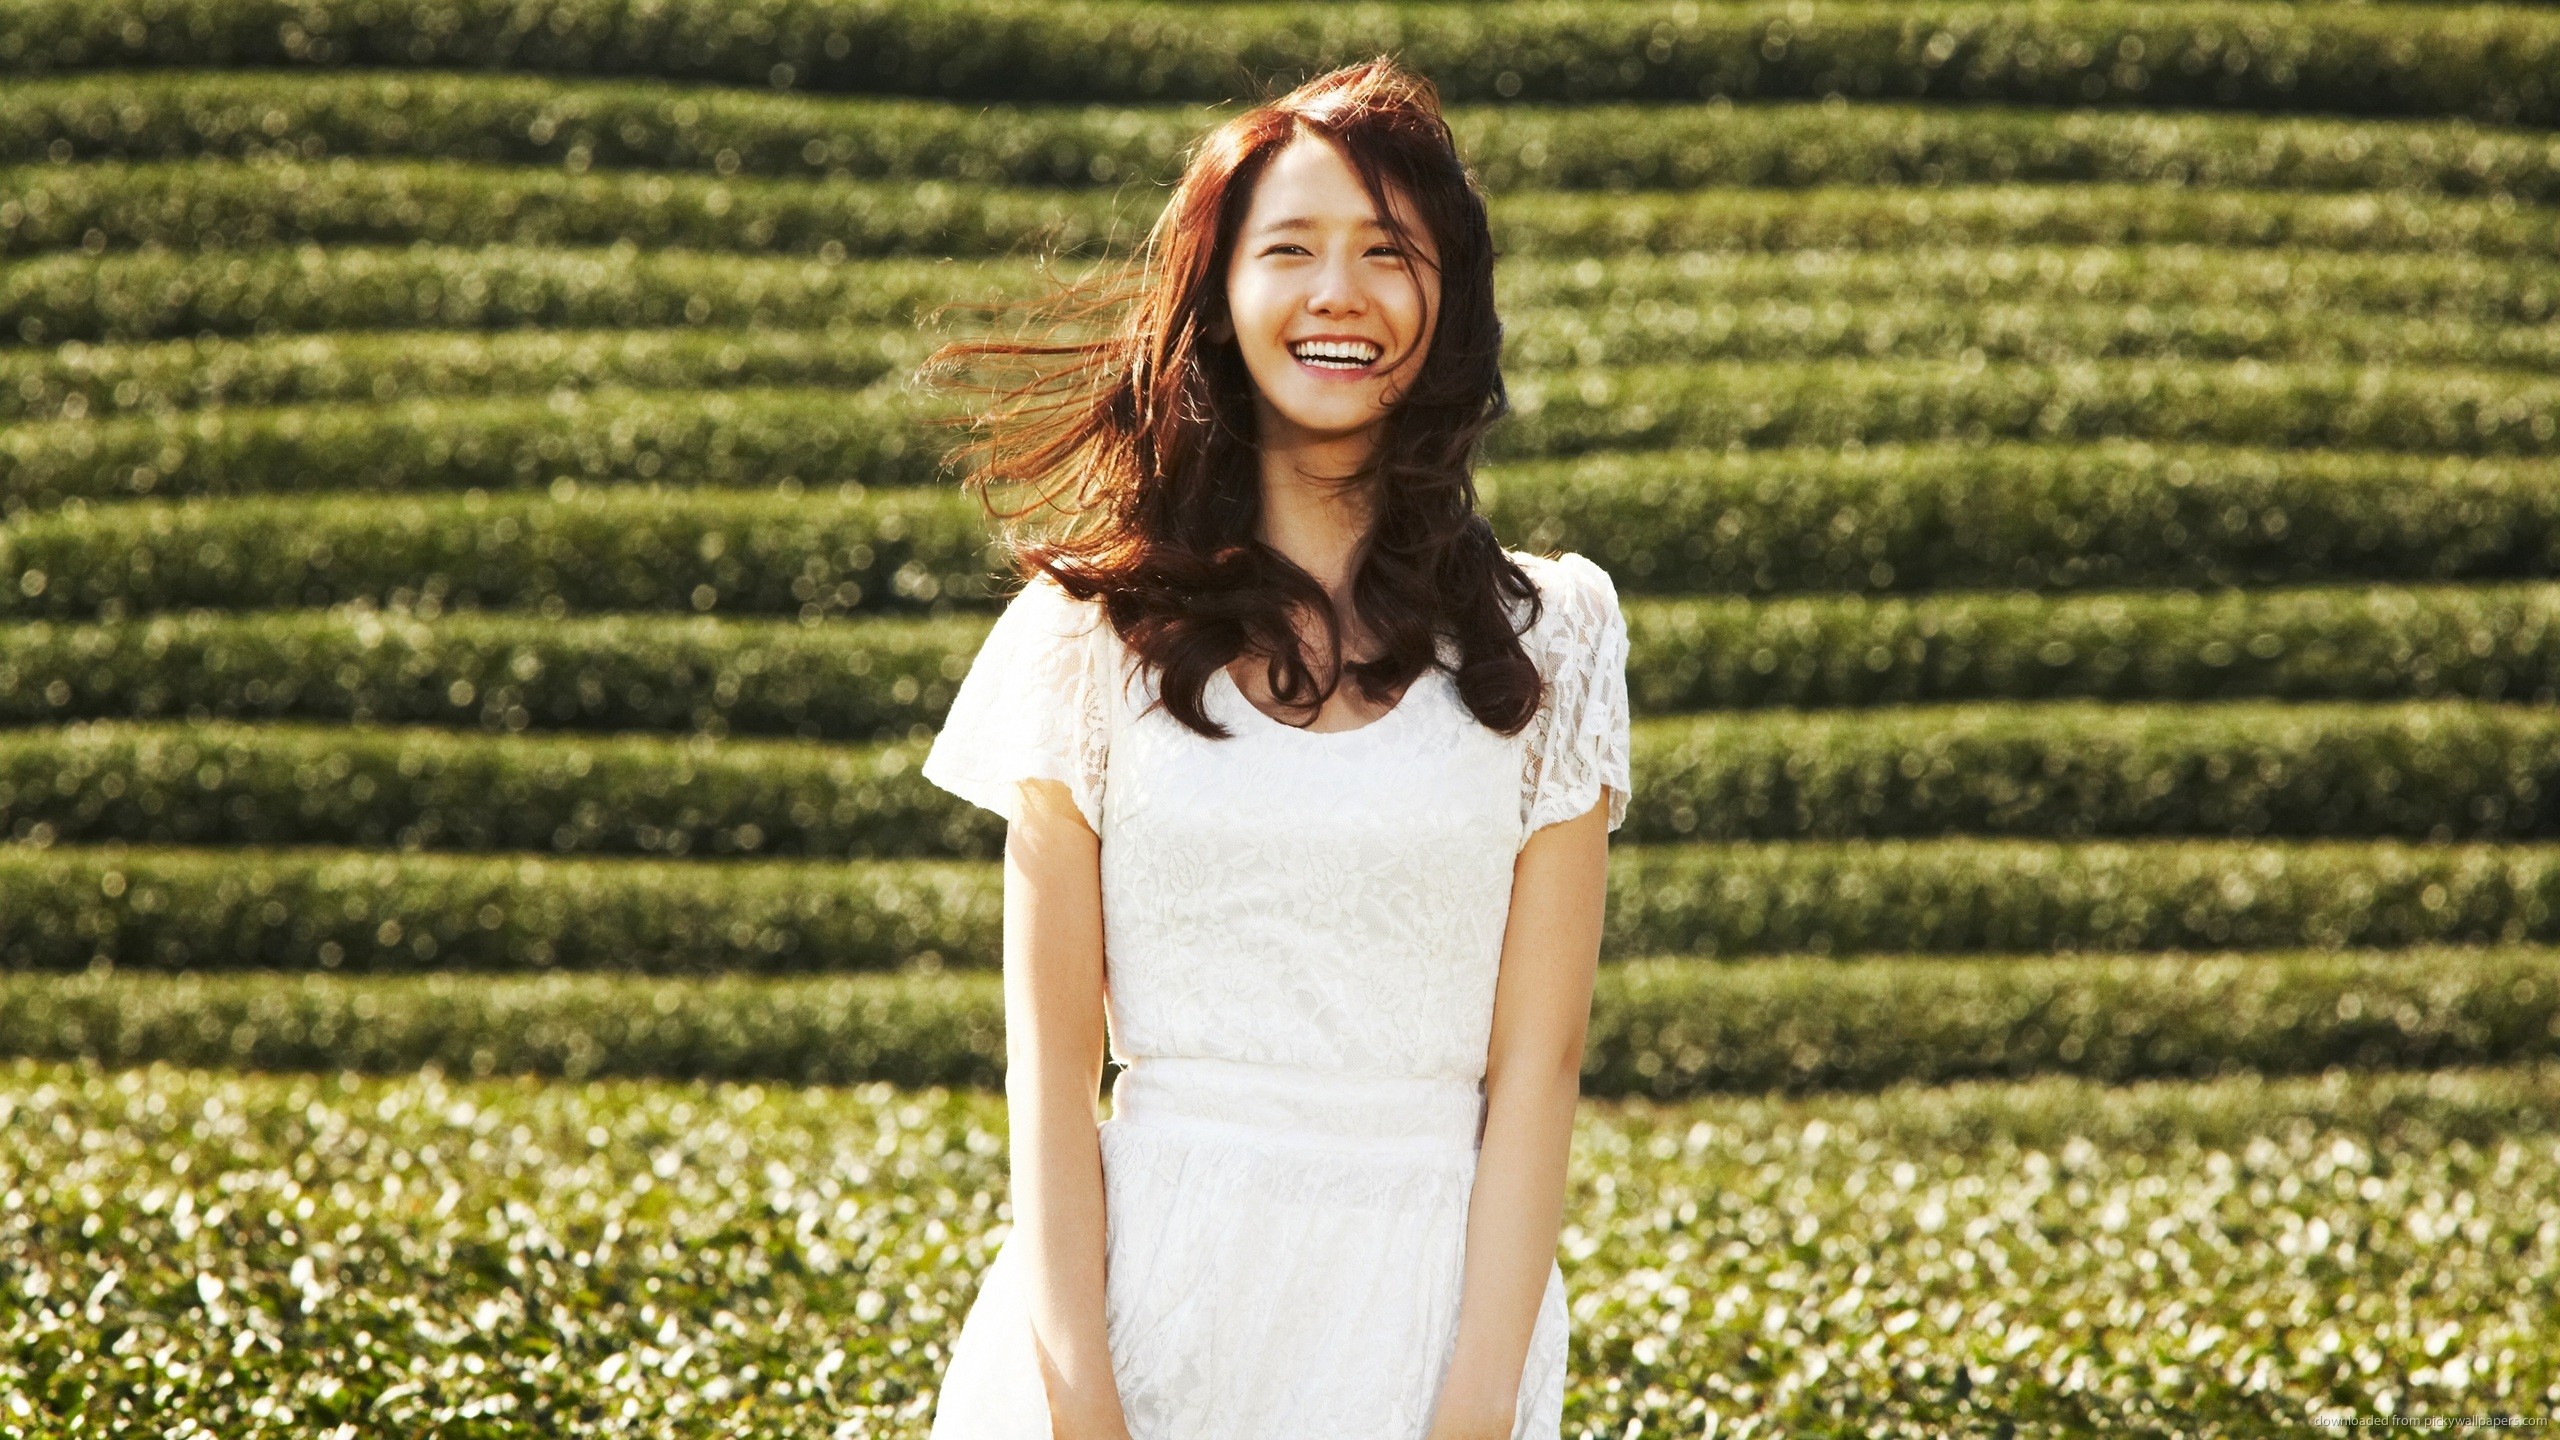 2560x1440 Ima Yoona In The Field for 